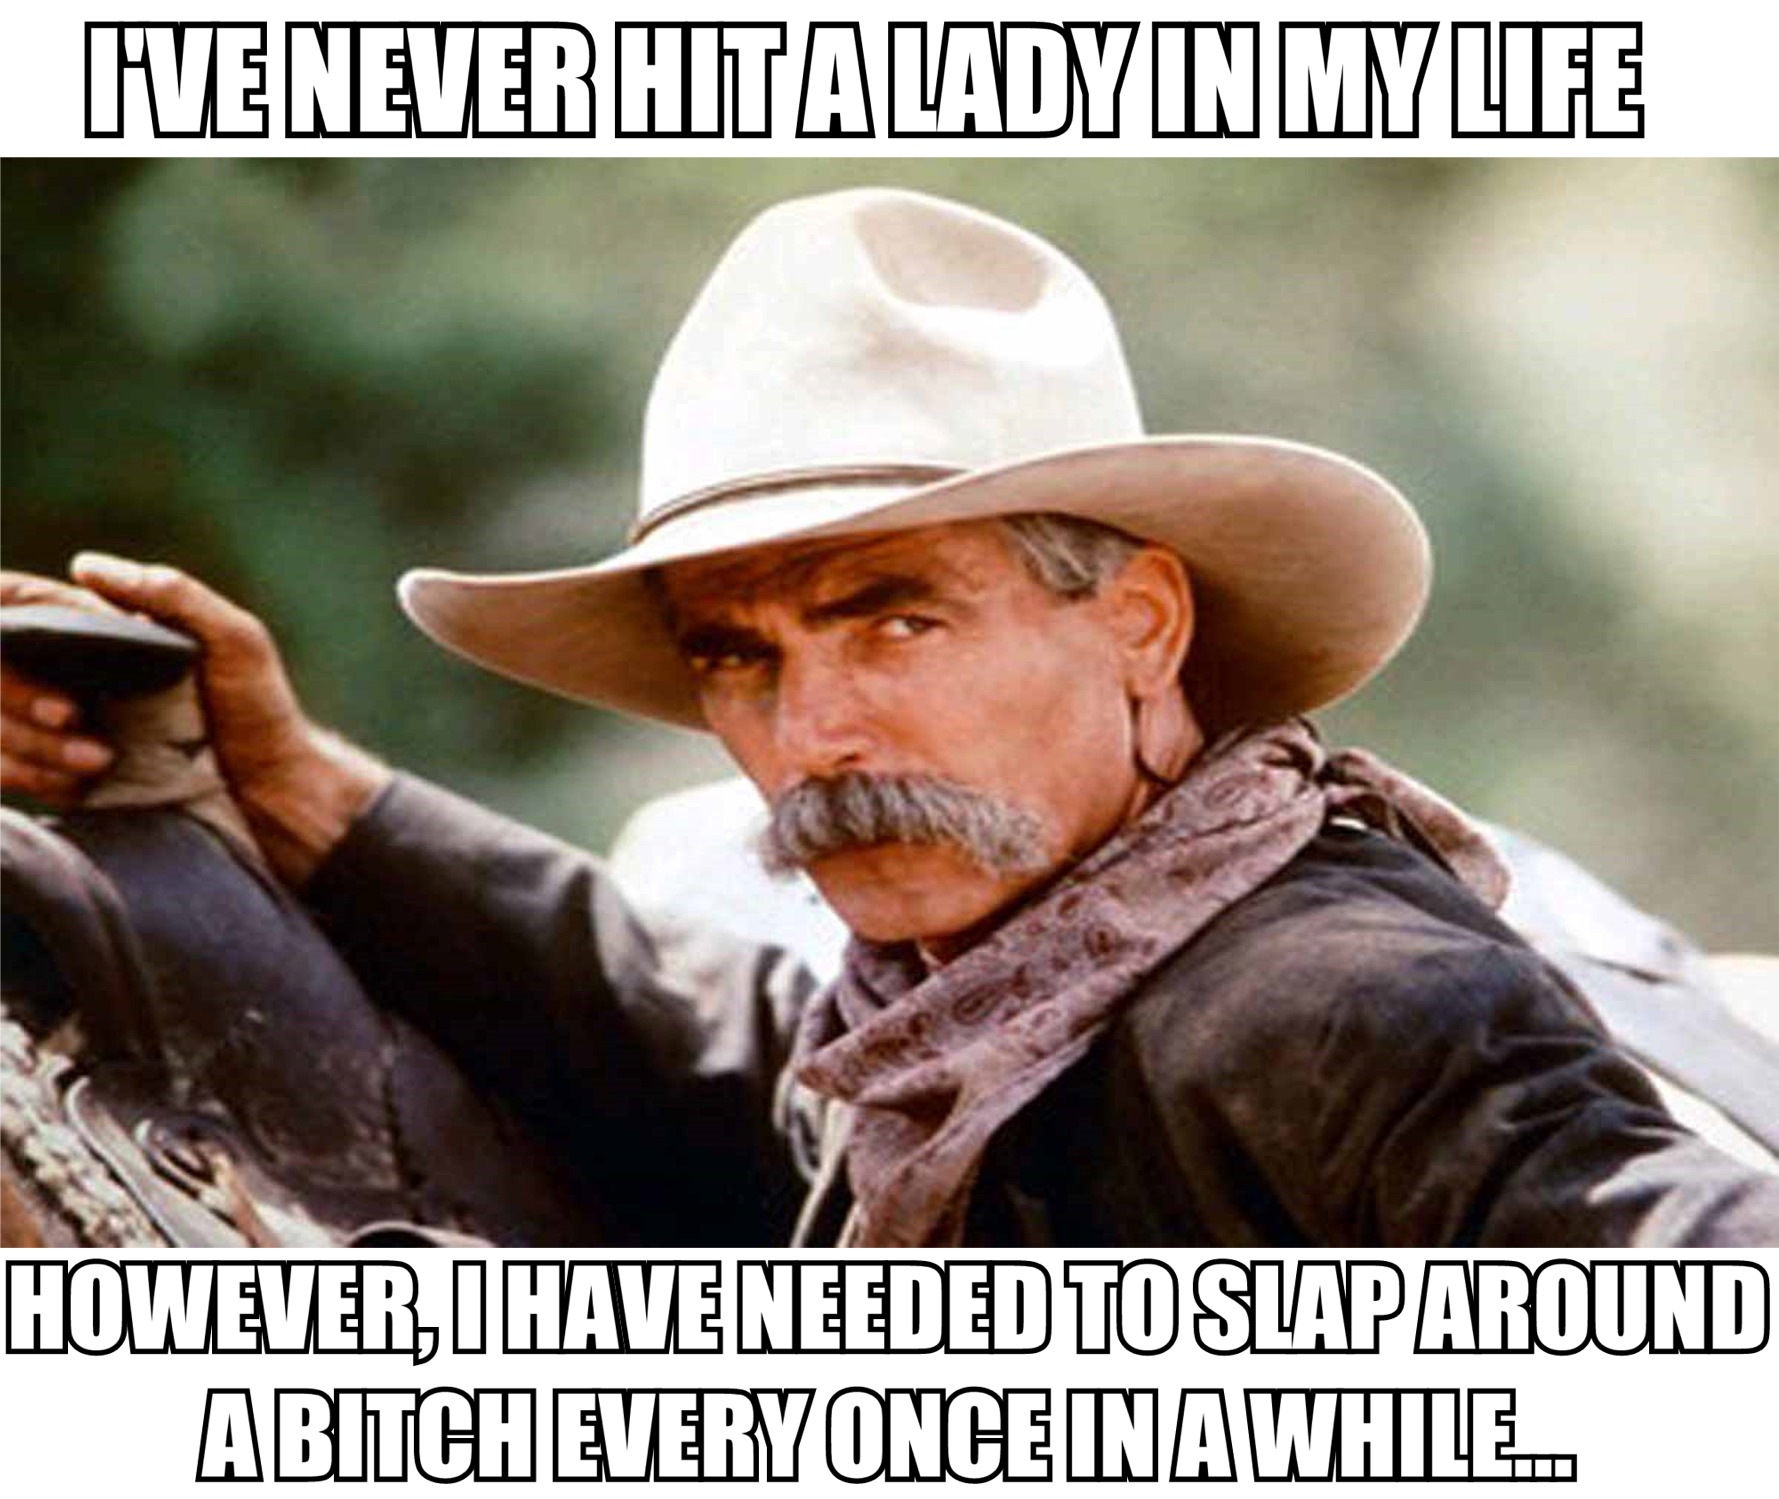 memes - virgil earp tombstone - Henever Hitalady In My Life However, I Have Needed To Slap Around Abitch Every Once In A While..